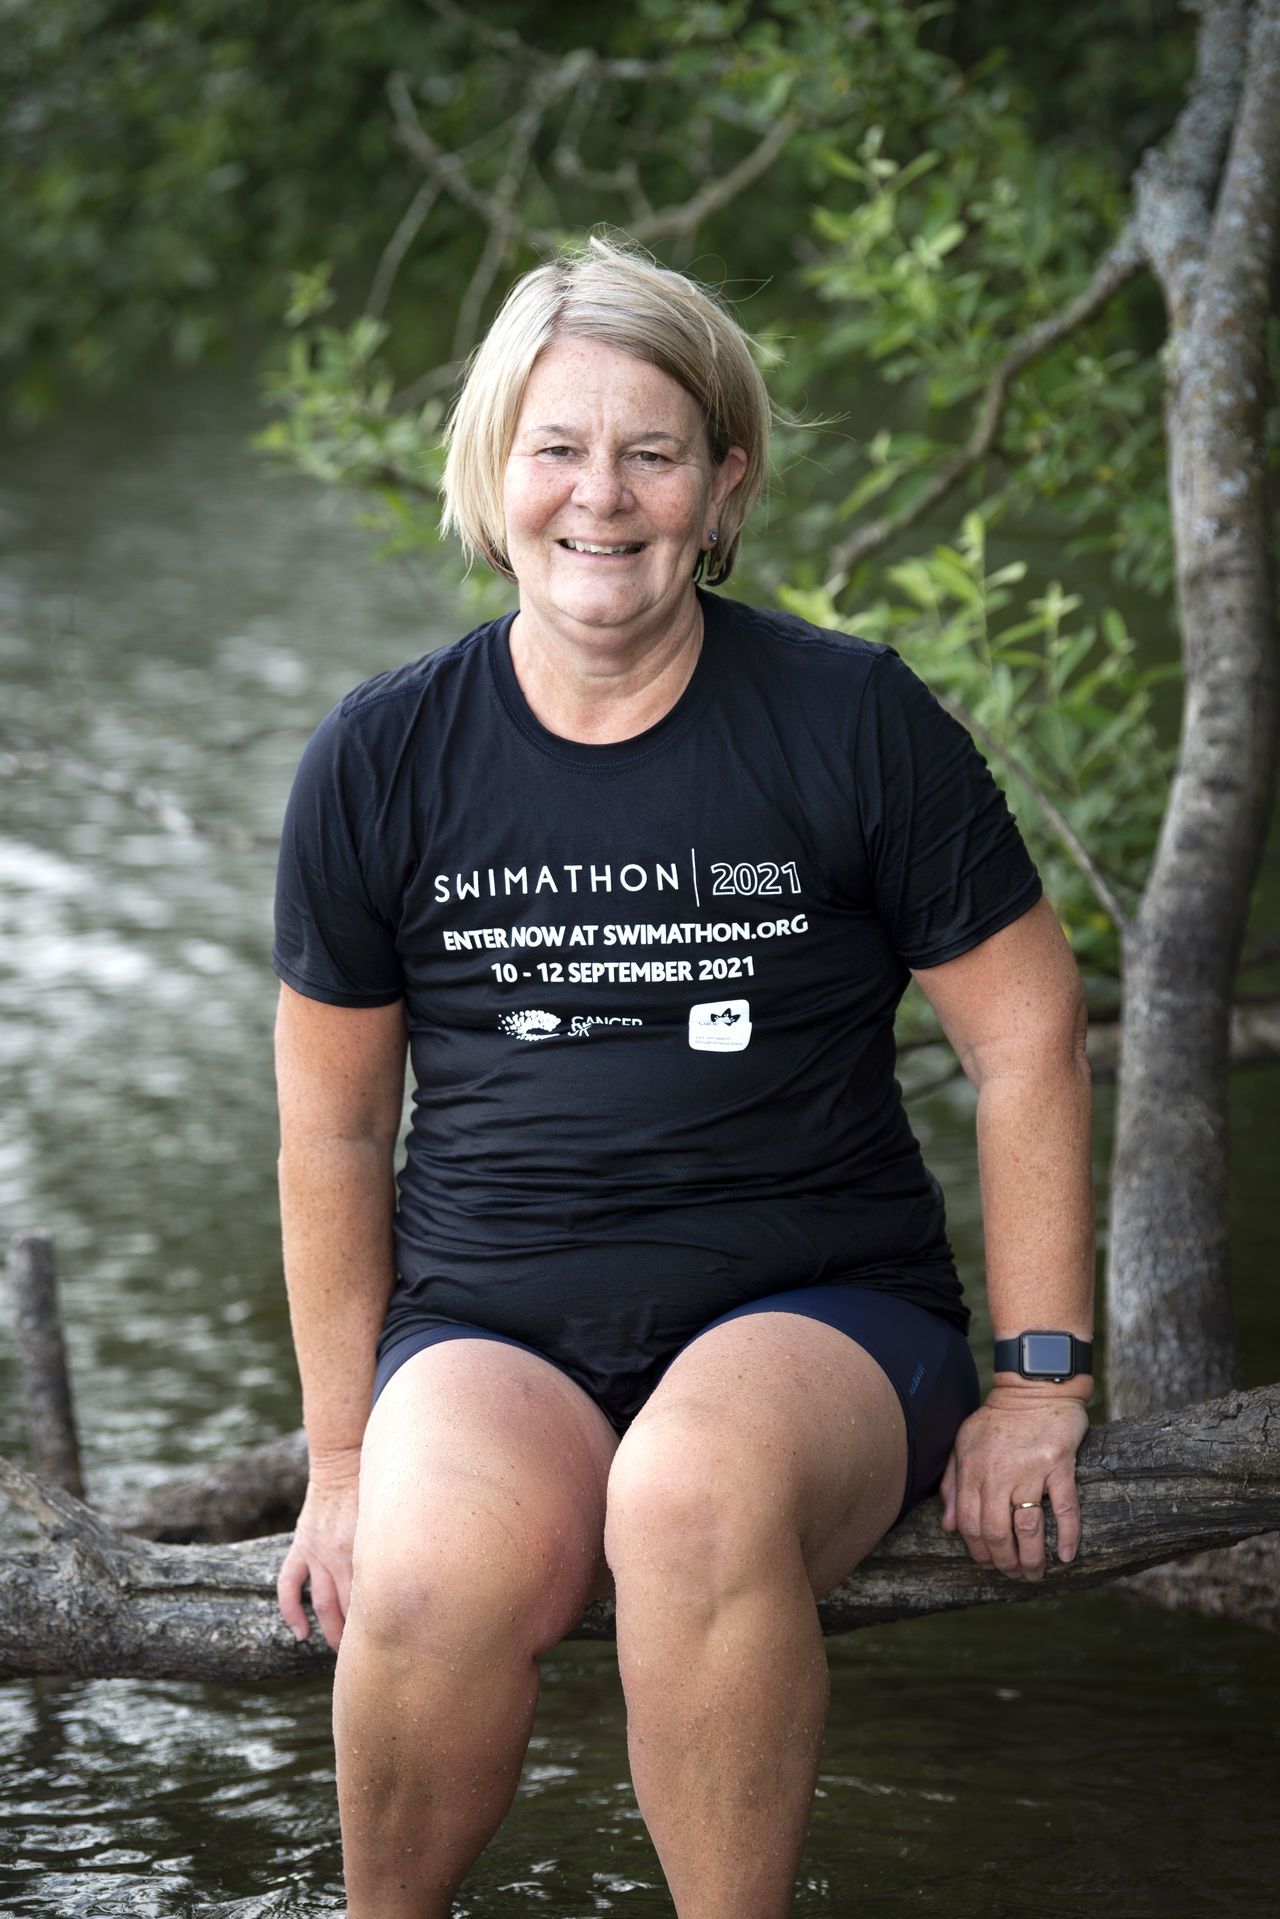 Donna McGuire will attempt to swim in as many lochs as possible to raise money for cancer charities.